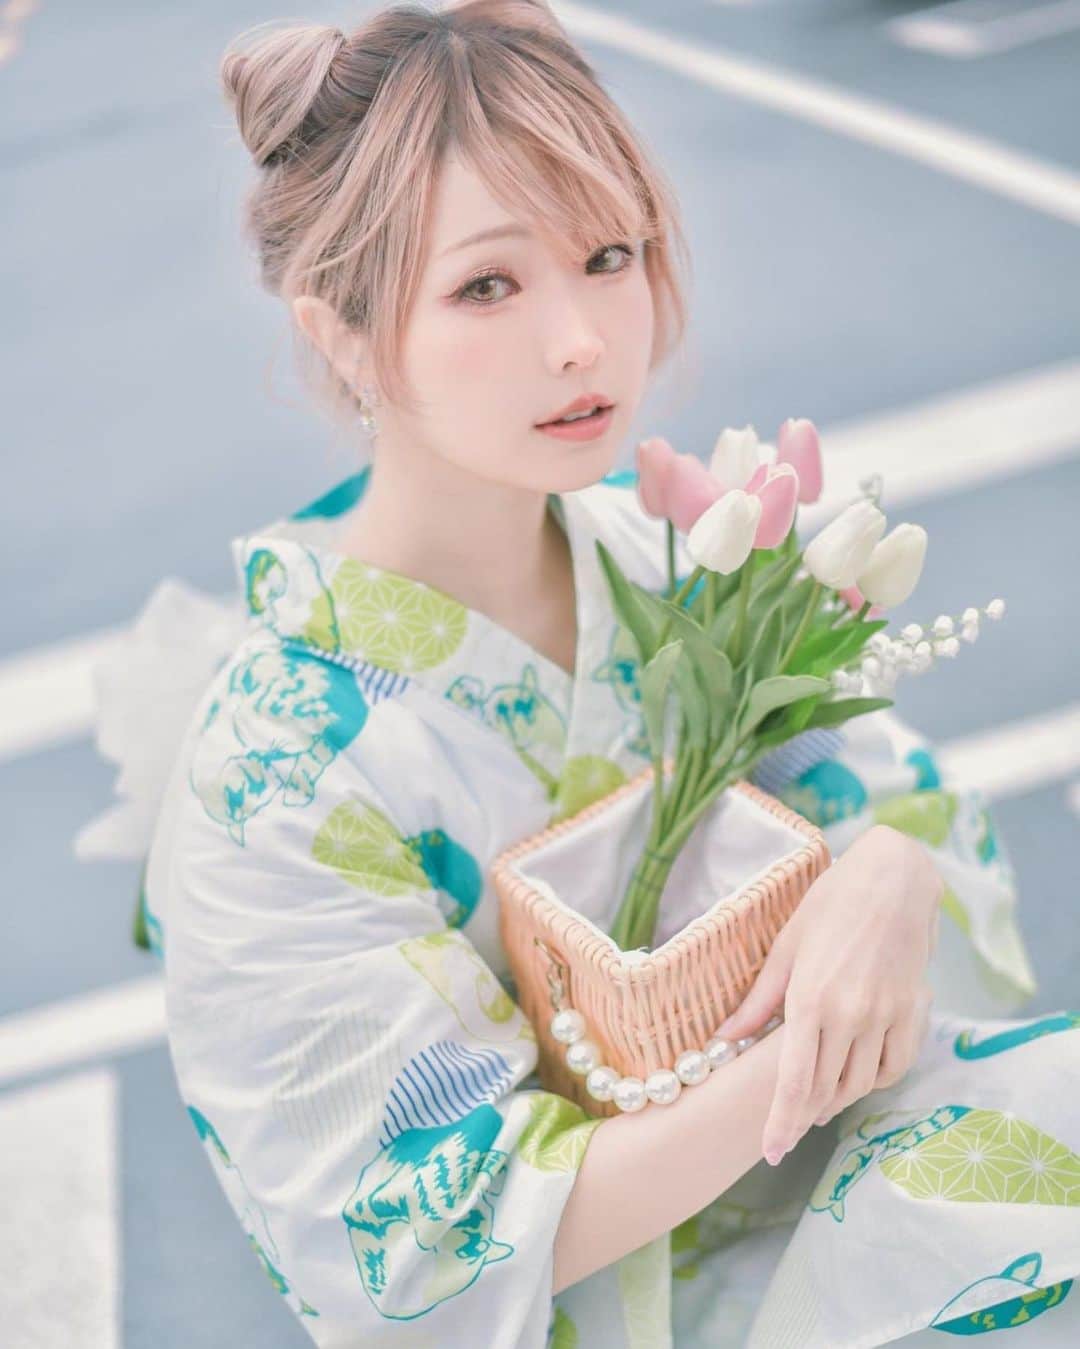 Elyのインスタグラム：「Yukata with Neko-mimi hair style (ﾉ*ФωФ)ﾉ Full set(33p) in this month set A 💌  ✧～✧～✧ 気のままの猫ちゃん✨ 今月のAセット写真(33枚)  ✧～✧～✧ 貓貓浴衣和第一次用真髮綁貓貓耳髮型!(ﾉ*ФωФ)ﾉ 自由自在的貓貓(33p)收錄在本月A組💌  📷 @dzzdm 👘 @kimono_luna  #elycosplay #dailyely #elydaily #blessed #travel  #yukata #ゆかた #浴衣女子」